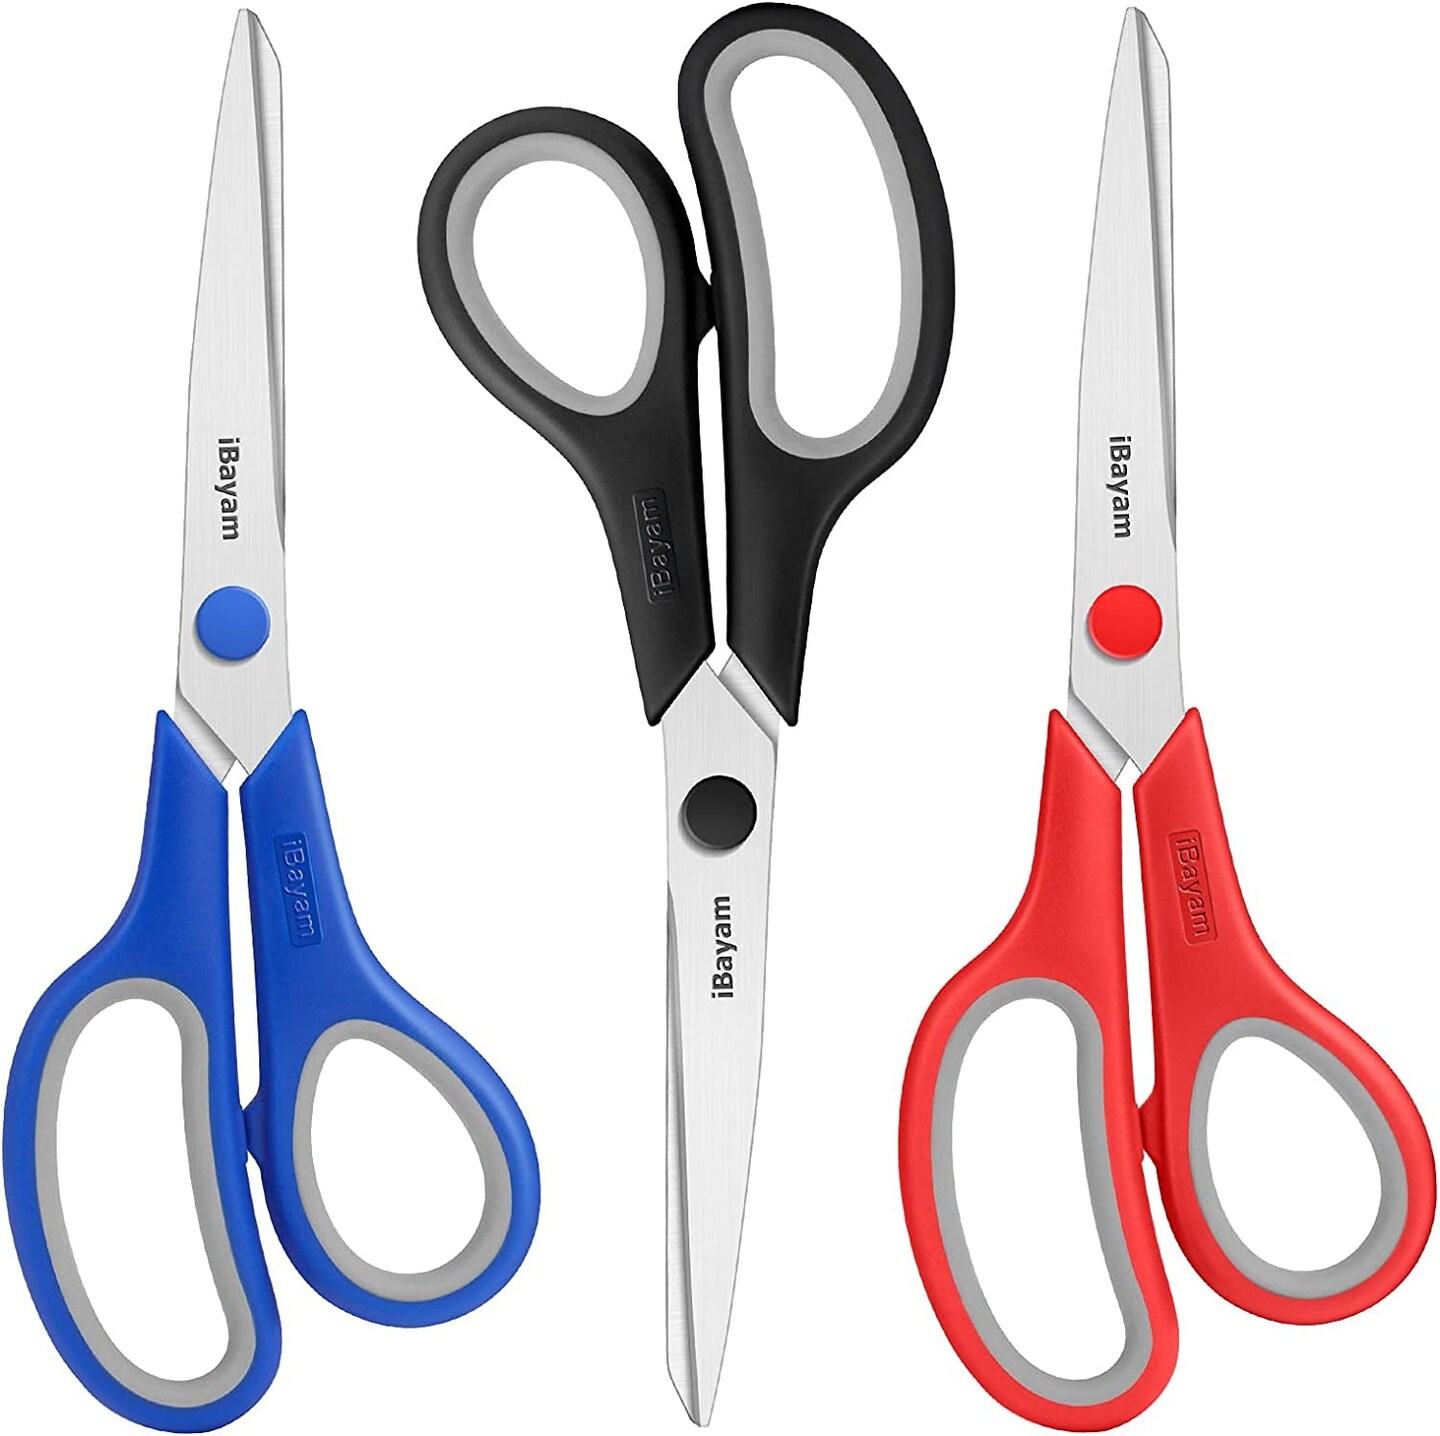 The 3 Best Scissors for Fabric You Need To Have